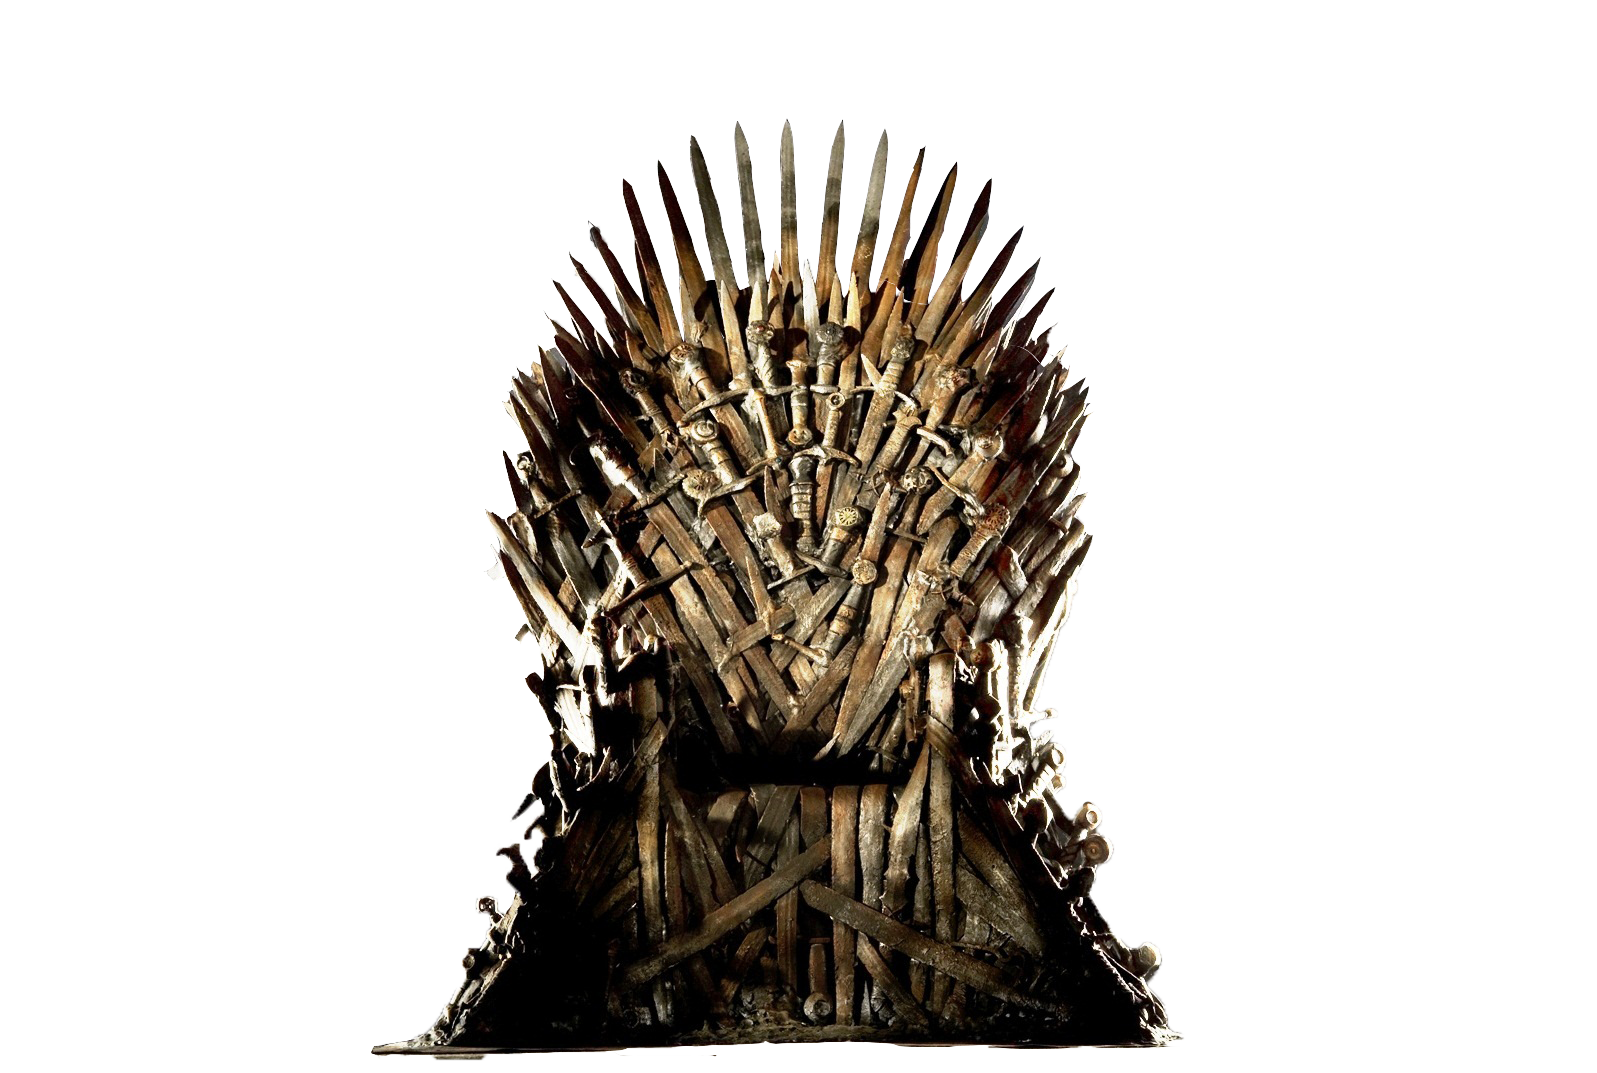 PNG File Name: Game of Throne